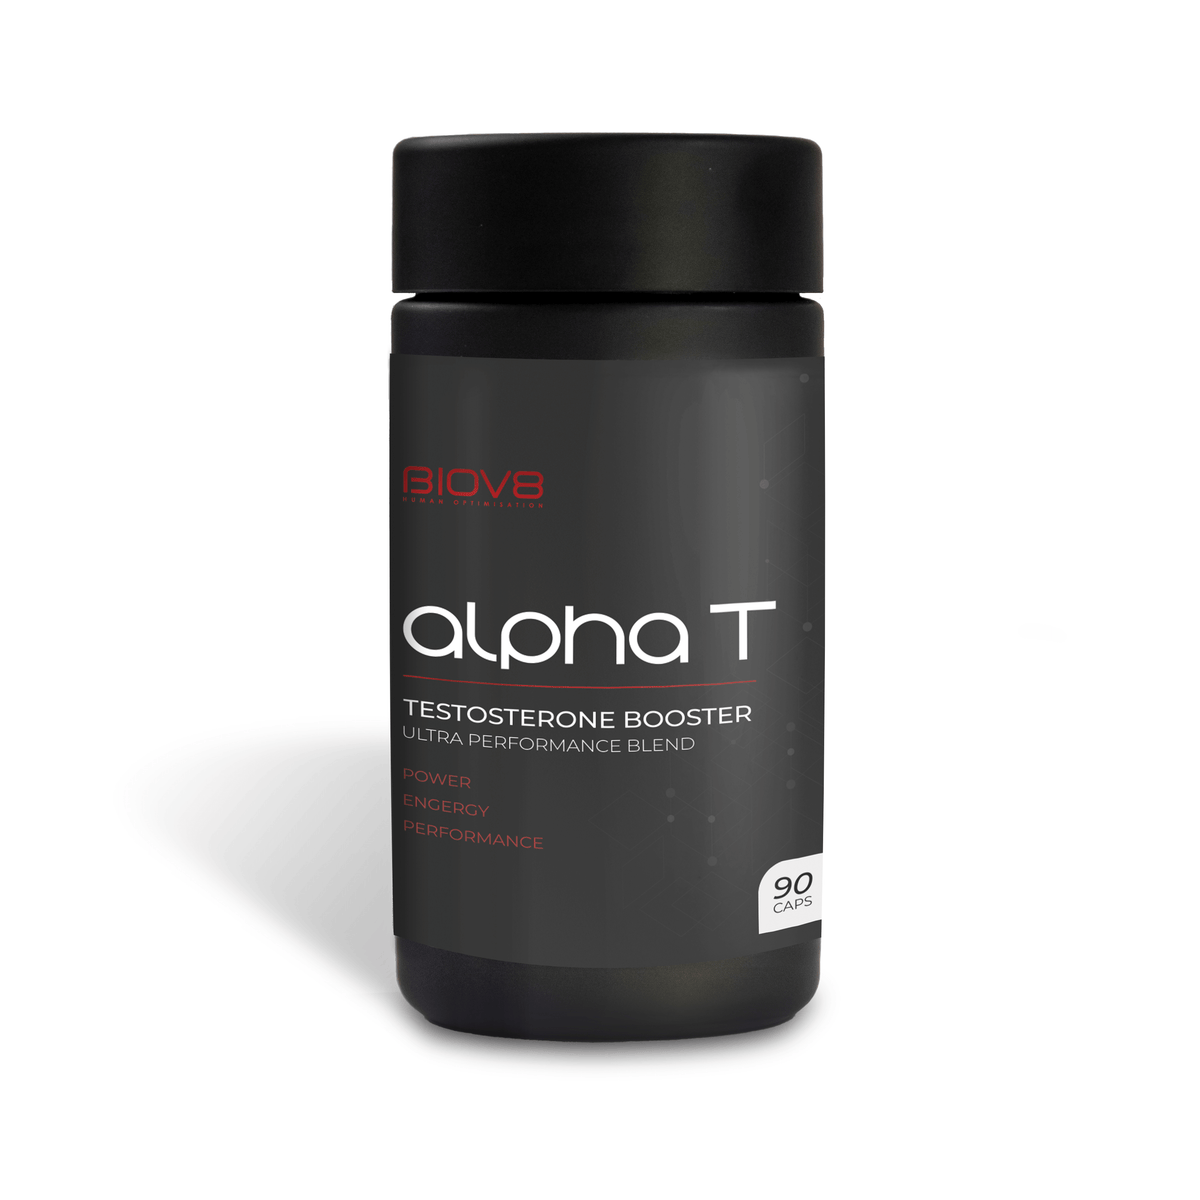 ALPHA T help boost and maintain healthy testosterone levels